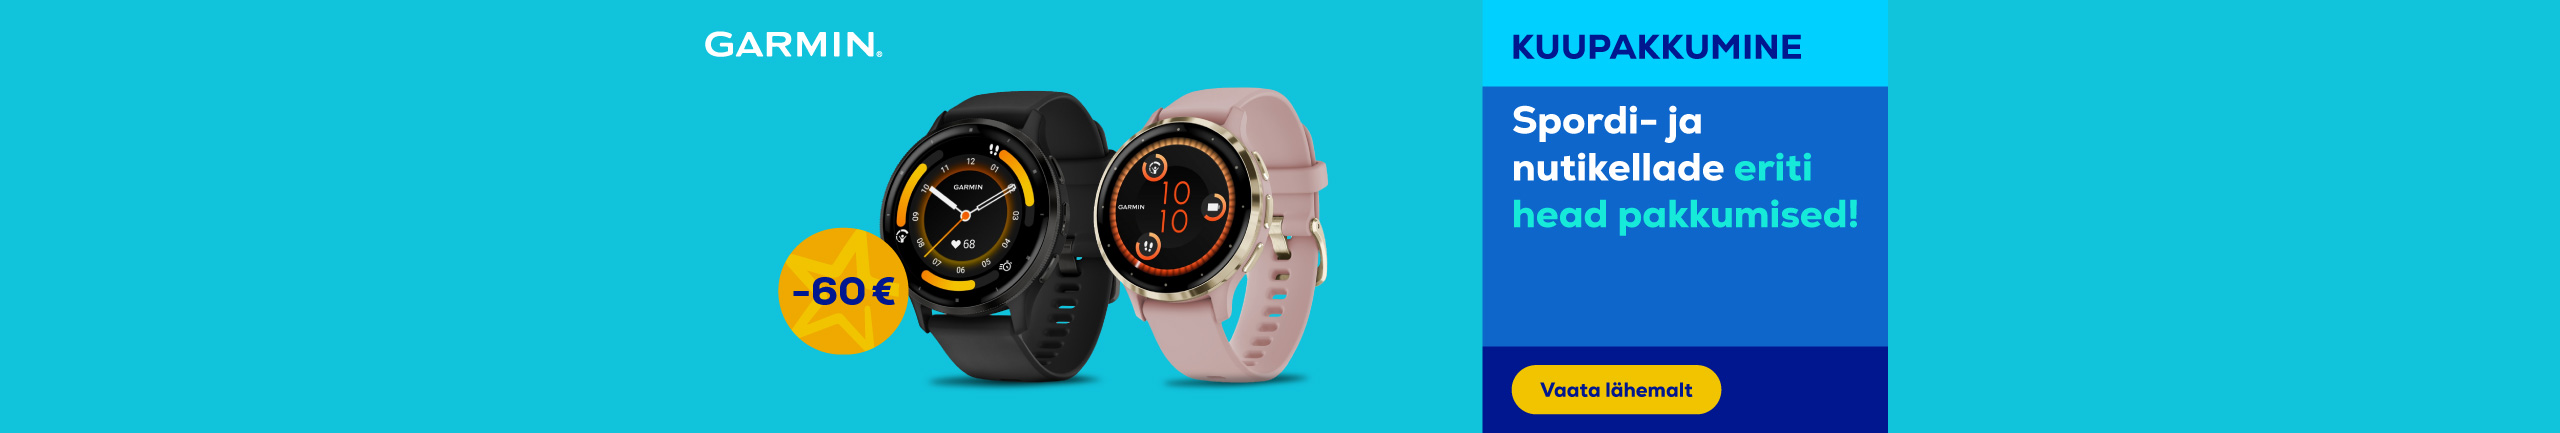 Special offers for sports- and smartwatches!